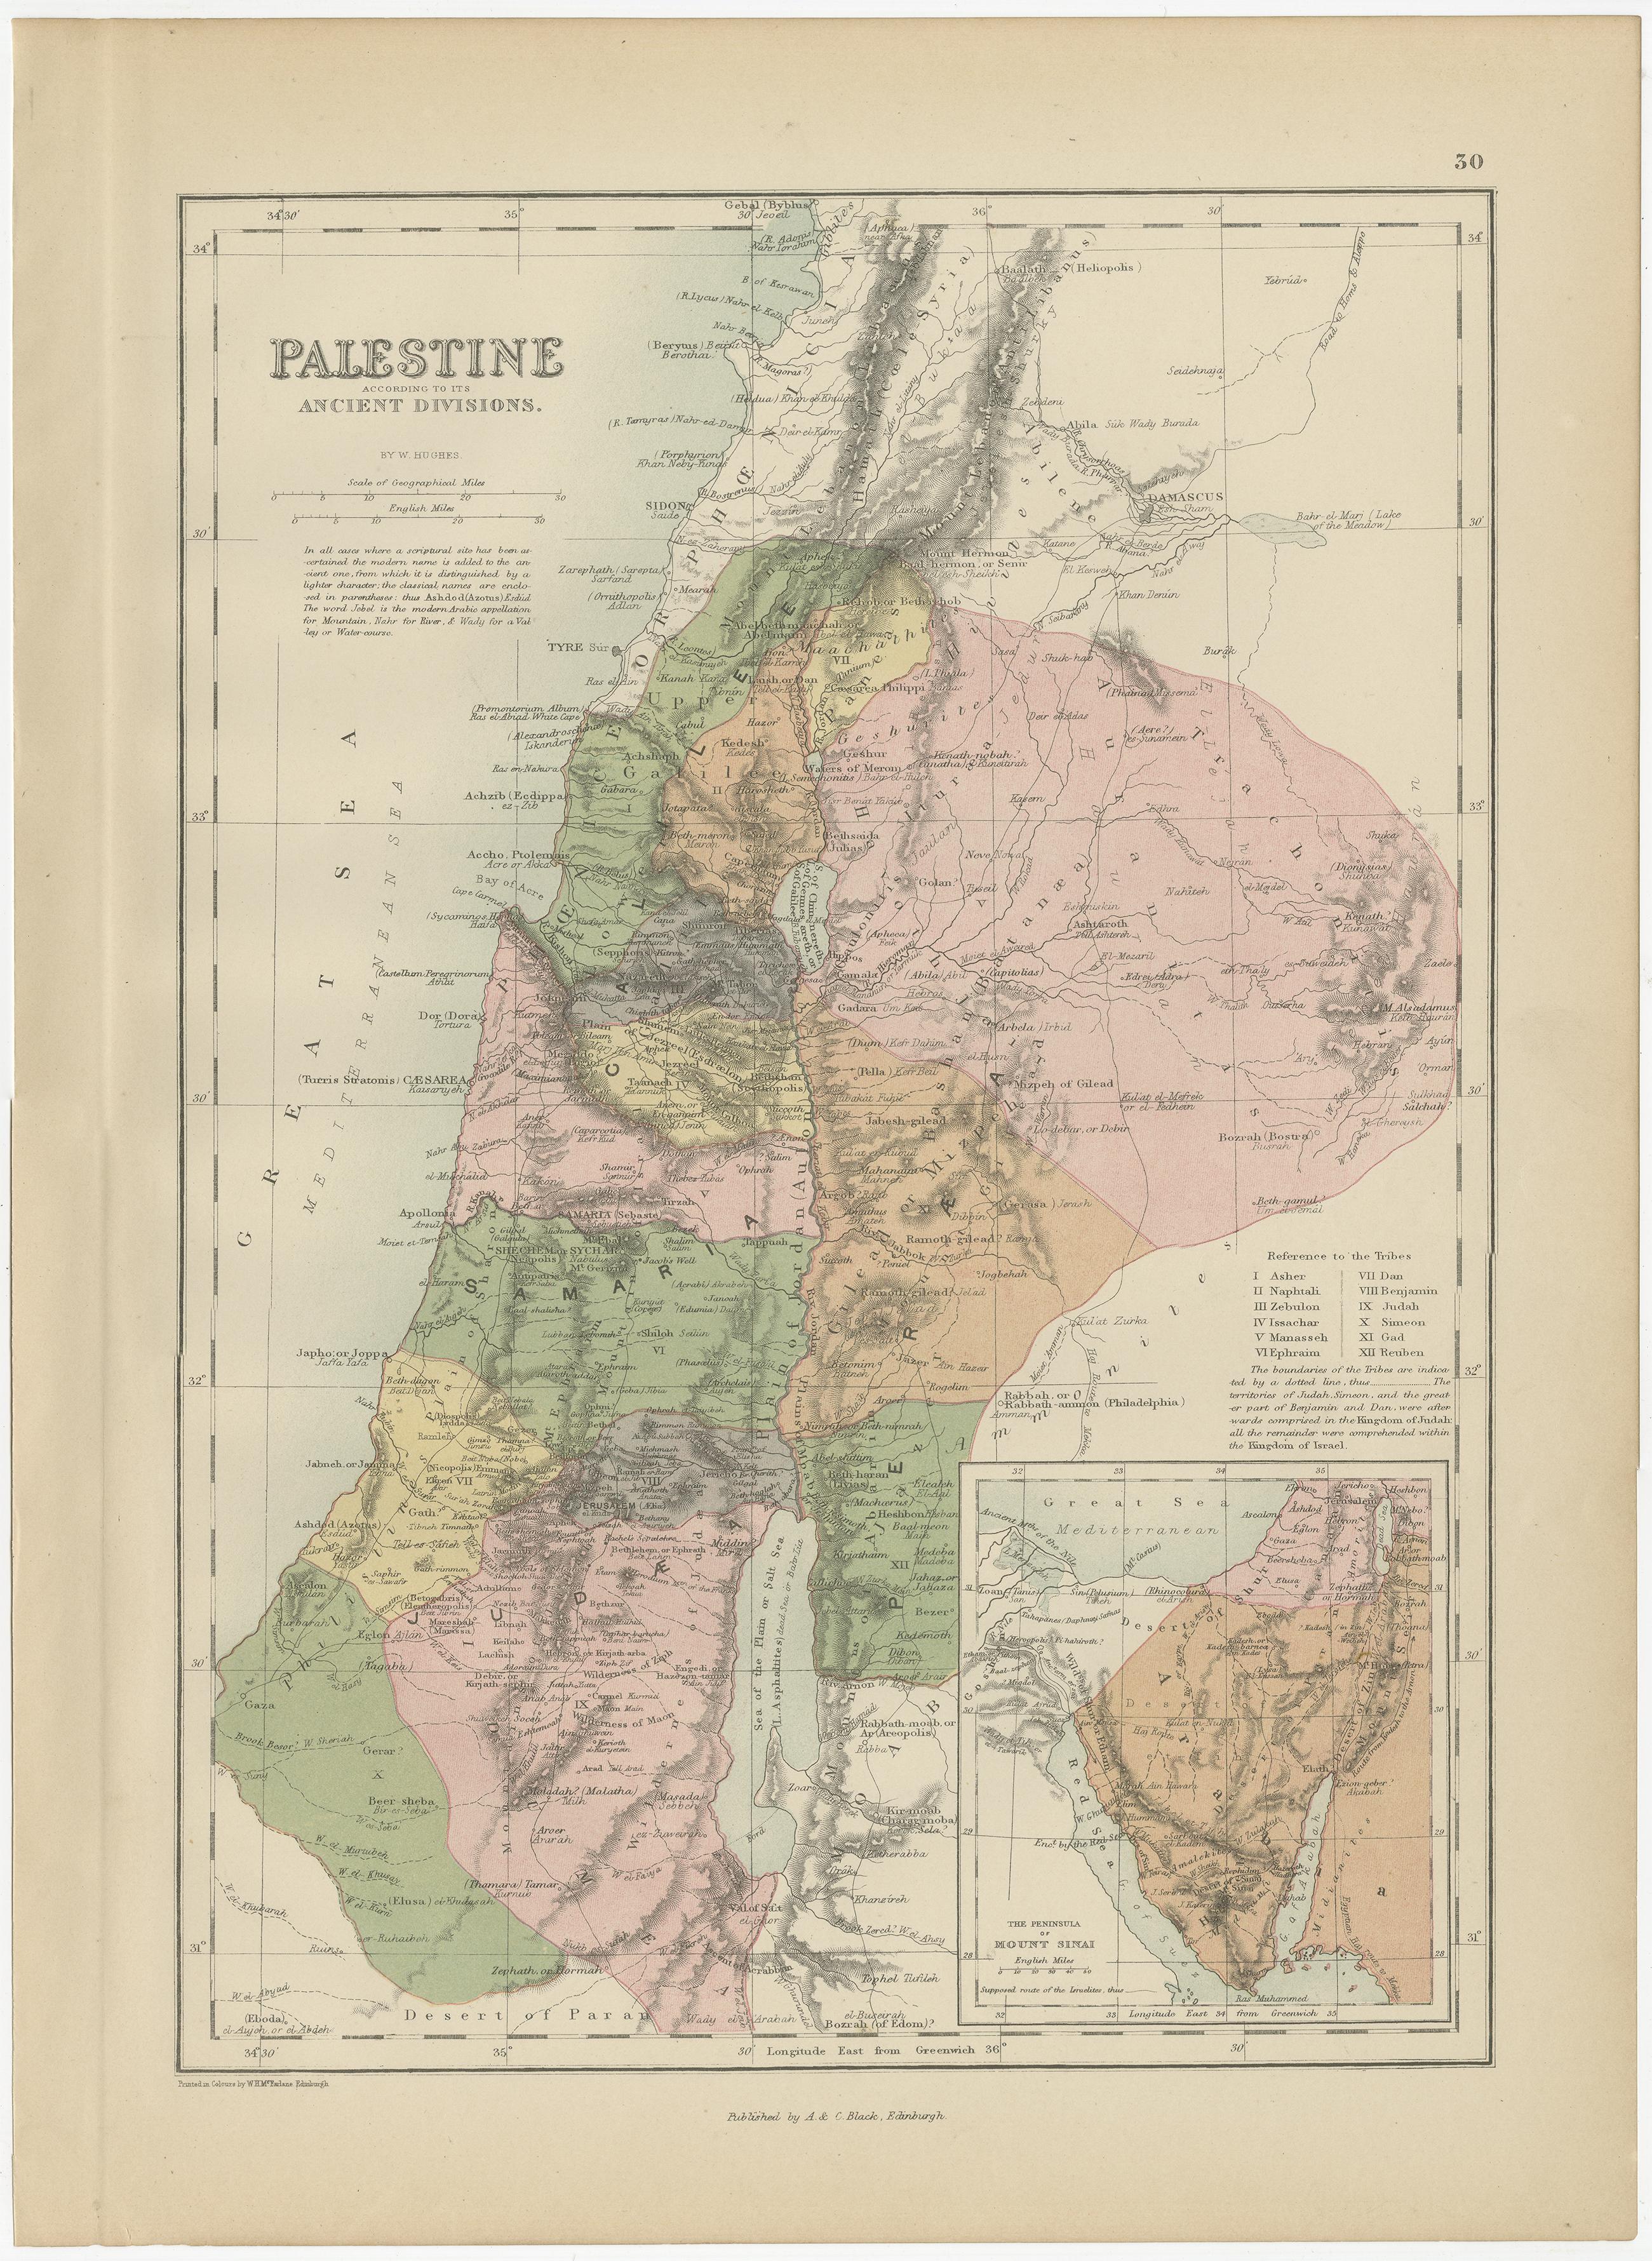 Antique map titled 'Palestine According to it's Ancient Divisions'. Original antique map of Palestine according to it's ancient divisions with inset map the Peninsula of Mount Sinai. This map originates from ‘Black's General Atlas of The World’.